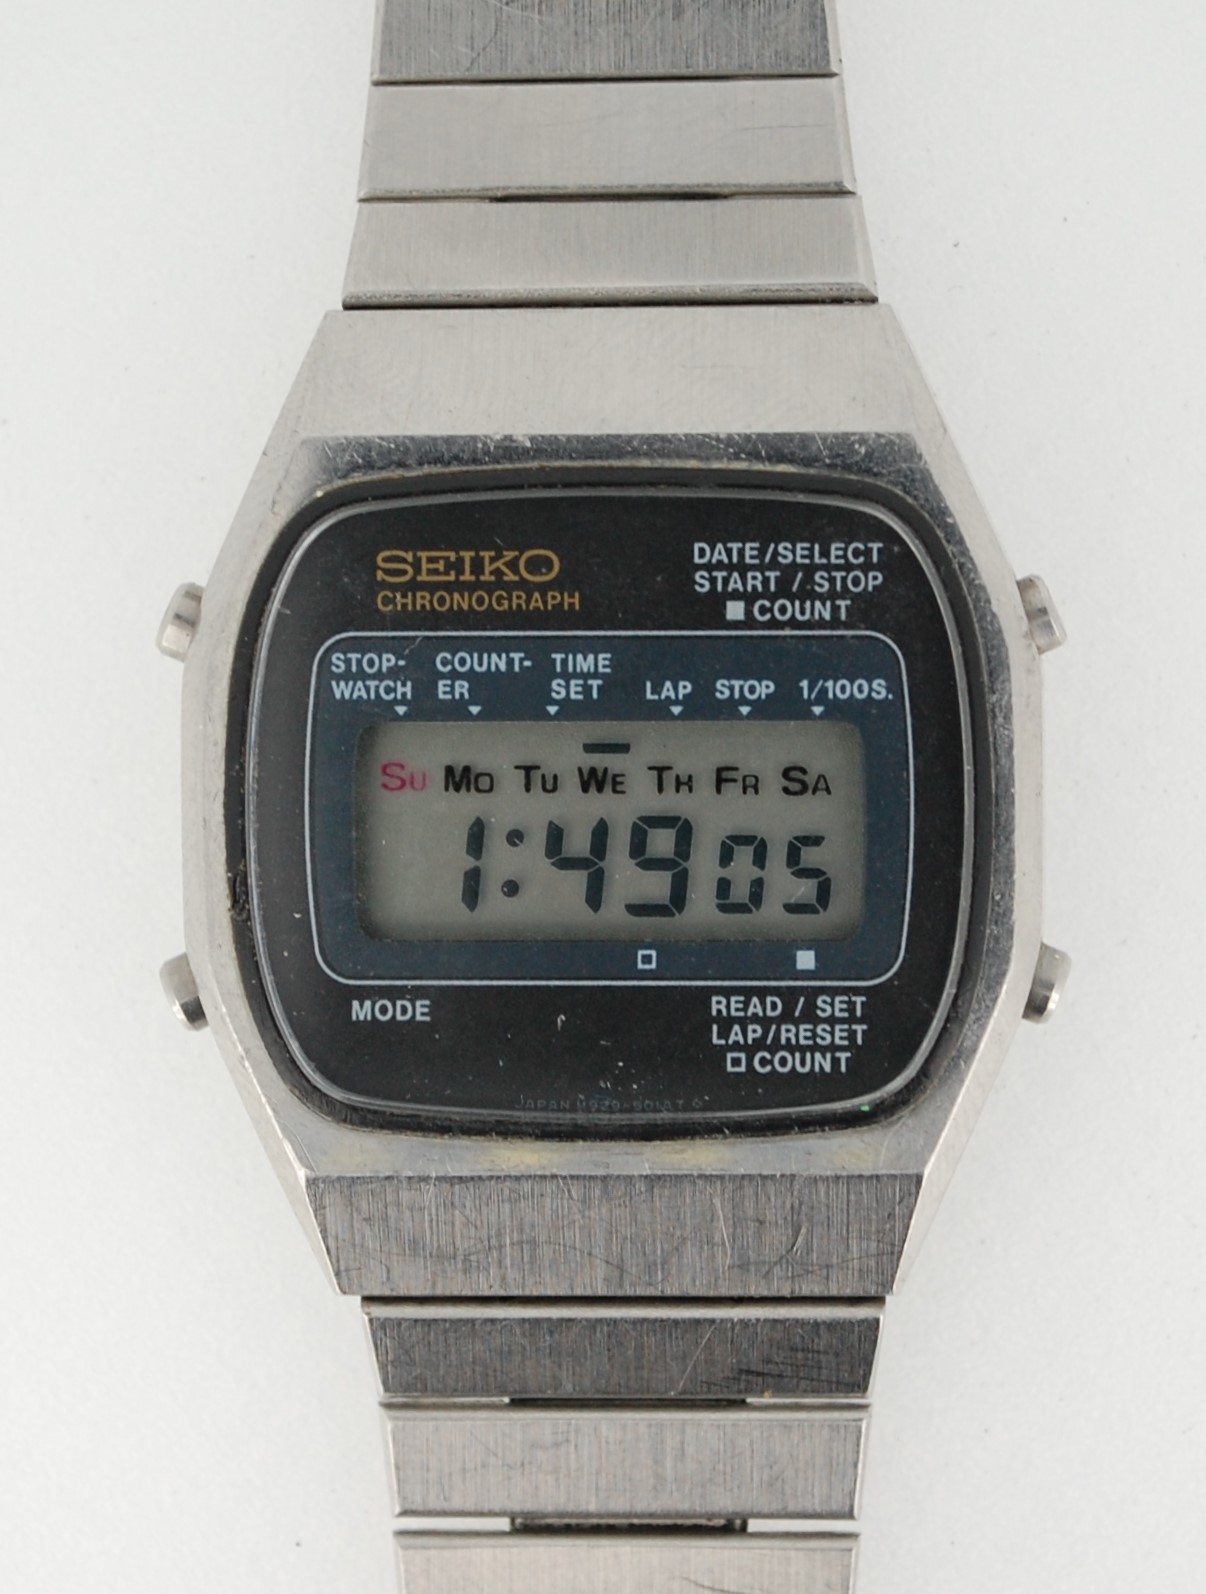 SOLD 1980 Seiko LCD Chronograph with box and papers M929 - 5010 Birth Year Watches